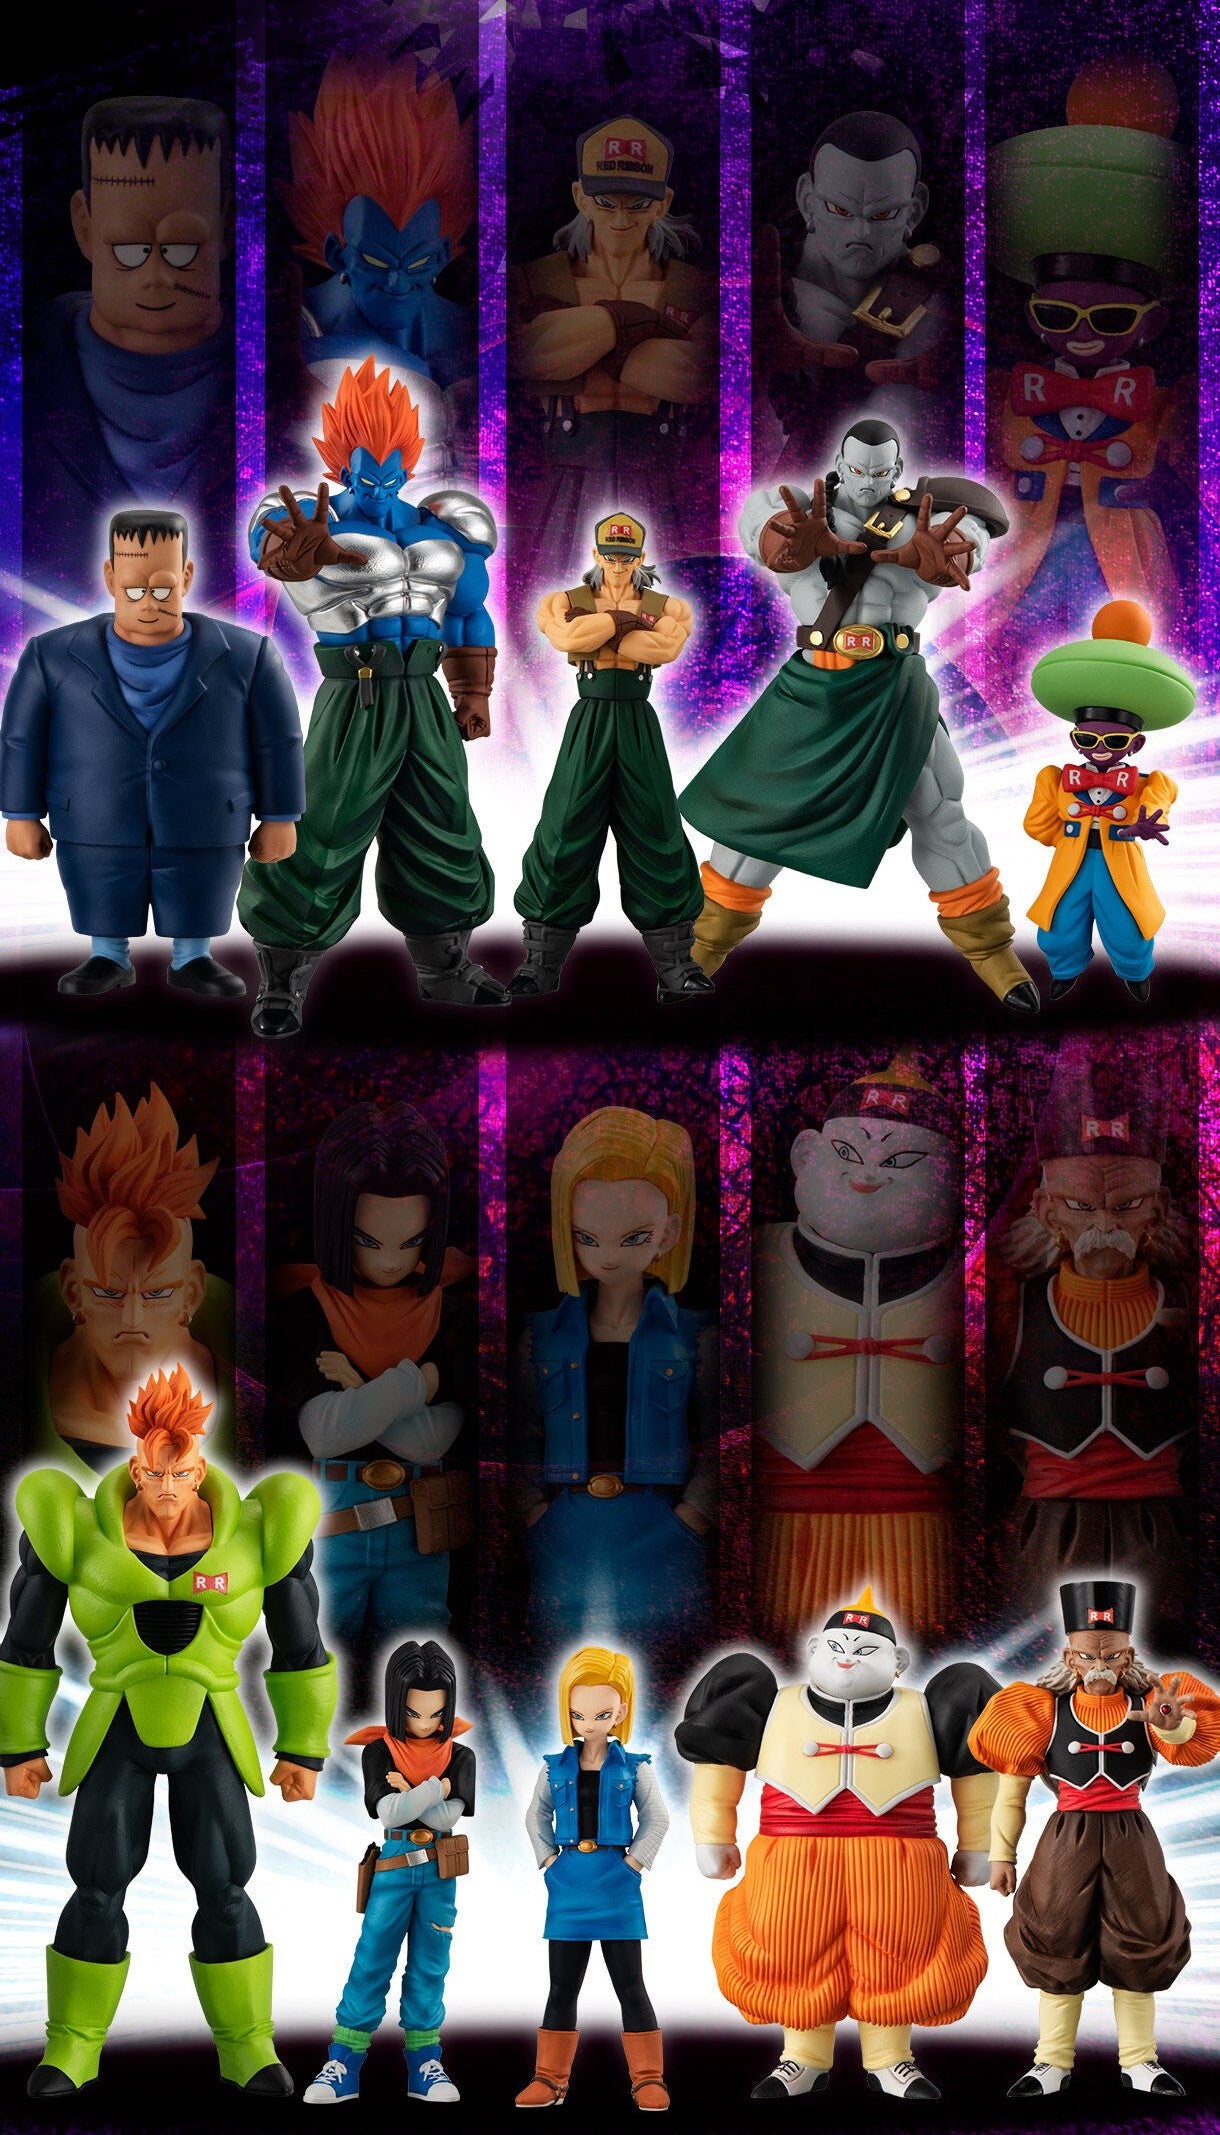 DRAGON BALL Z FIGURE HG - ANDROID COMPLETE SET – JumpIchiban